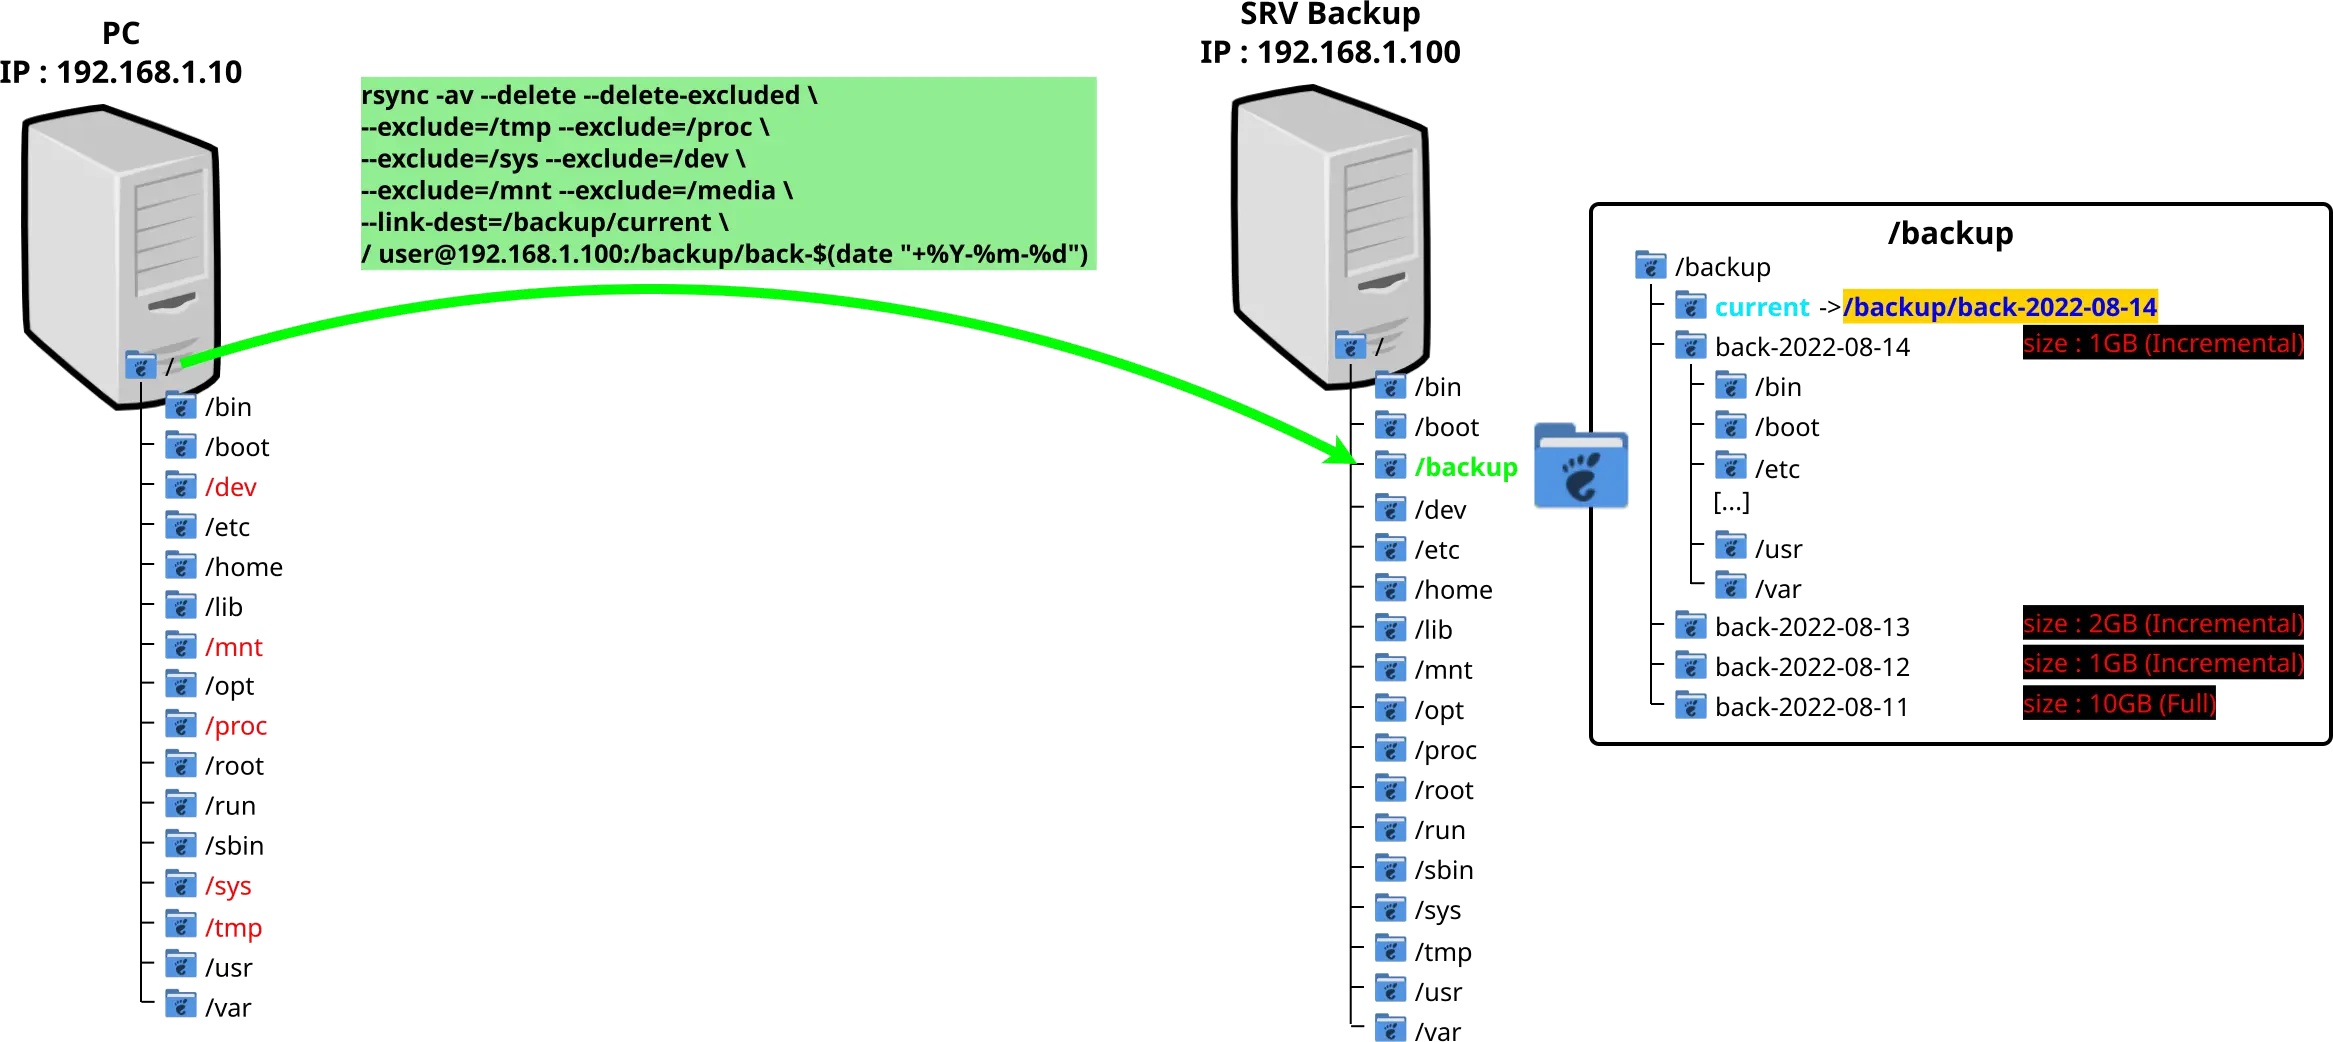 A Linux directory structure with an rsync incremental backup to a Network Linux server